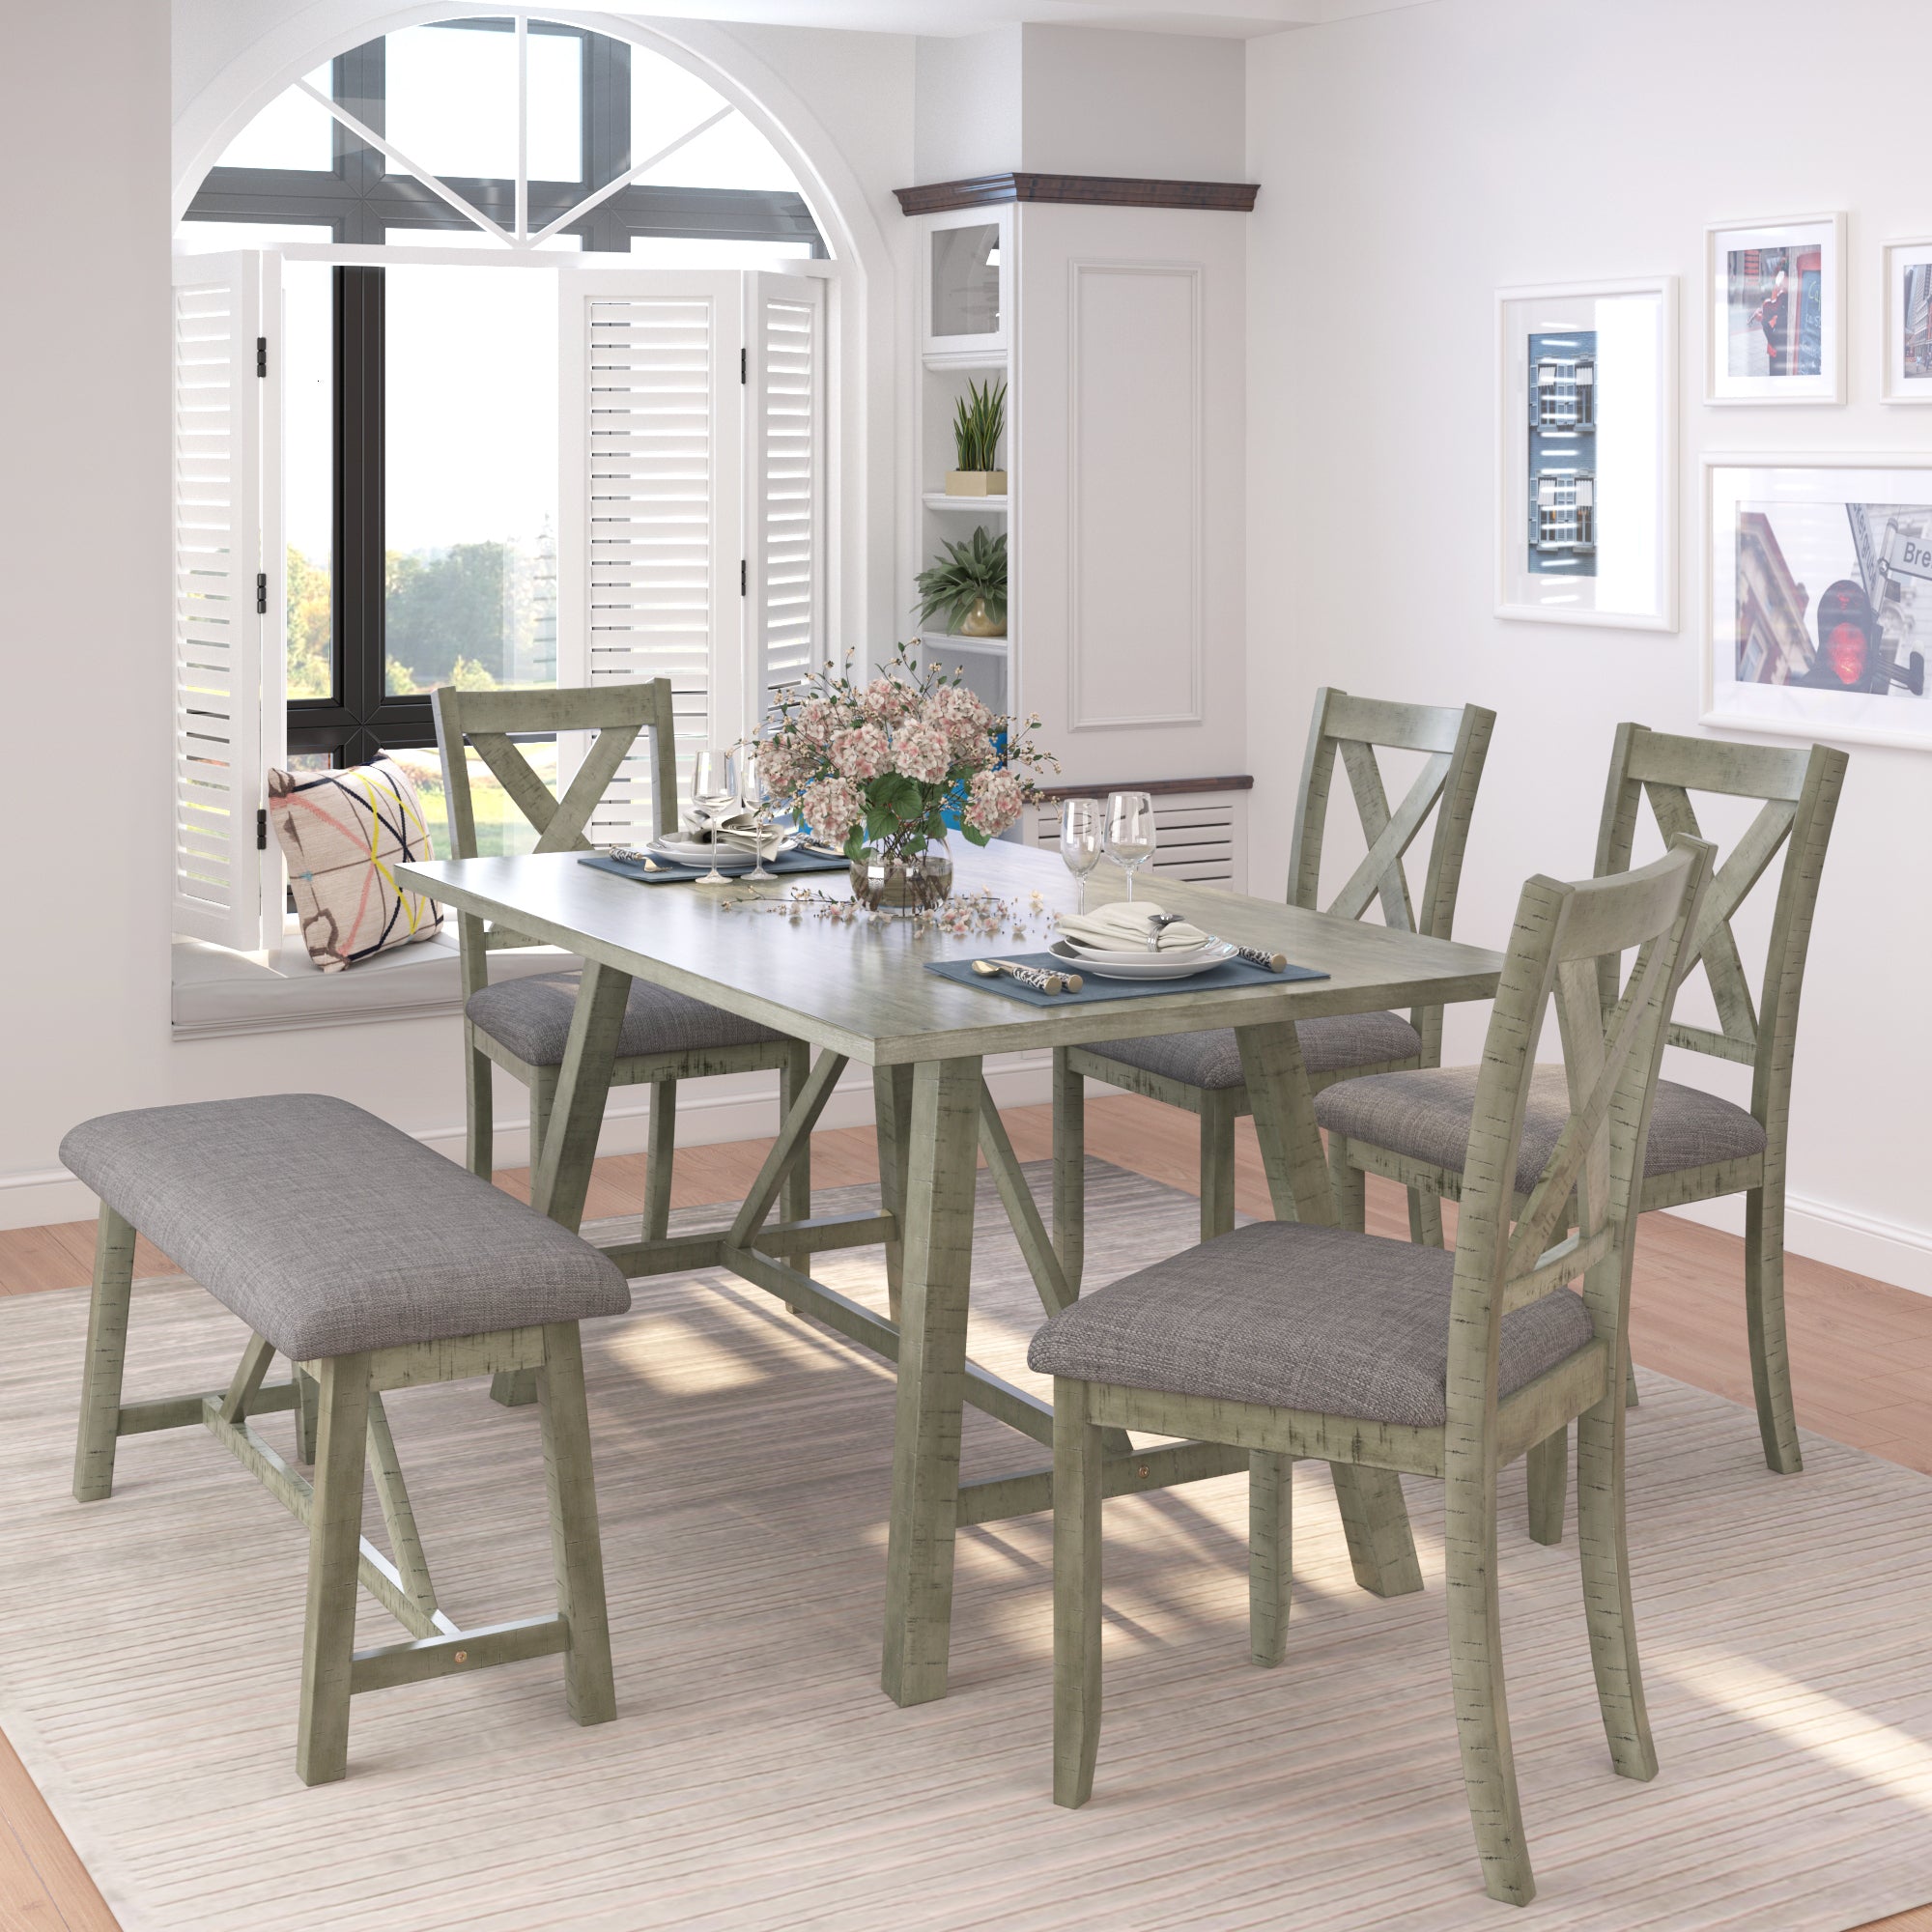 TOPMAX 6 Piece Wooden Dining Set with Table, Bench and 4 Chairs (Gray)